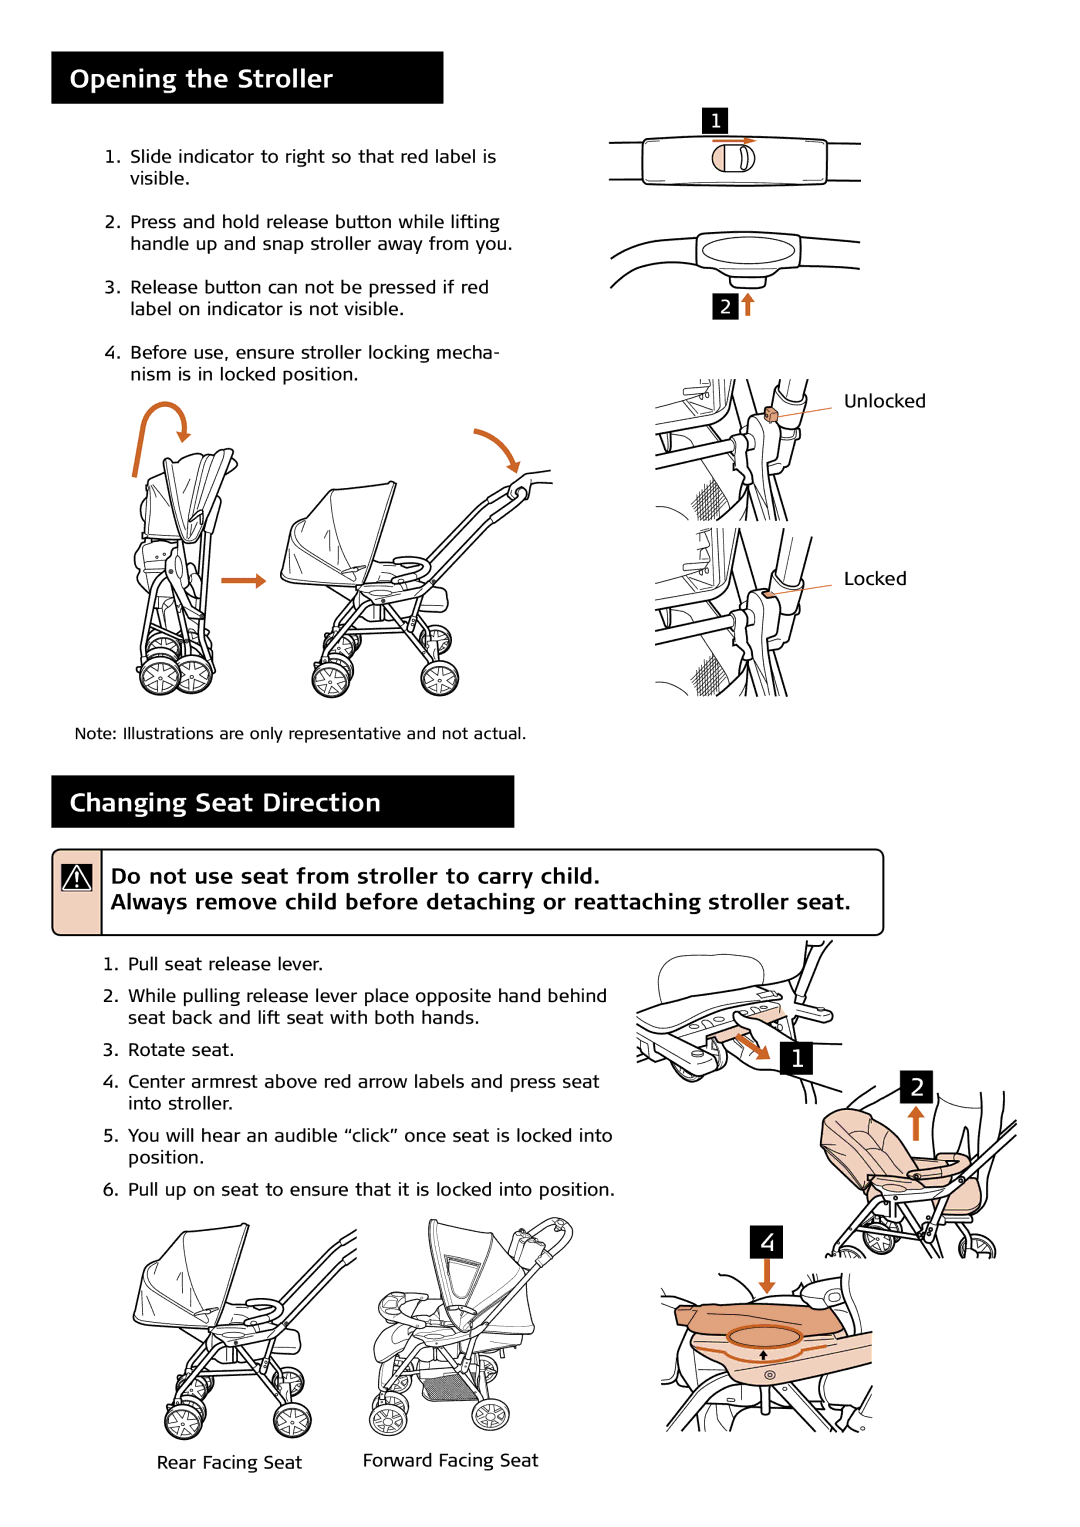 Combi 7100 Series instruction manual Opening the Stroller, Changing Seat Direction 